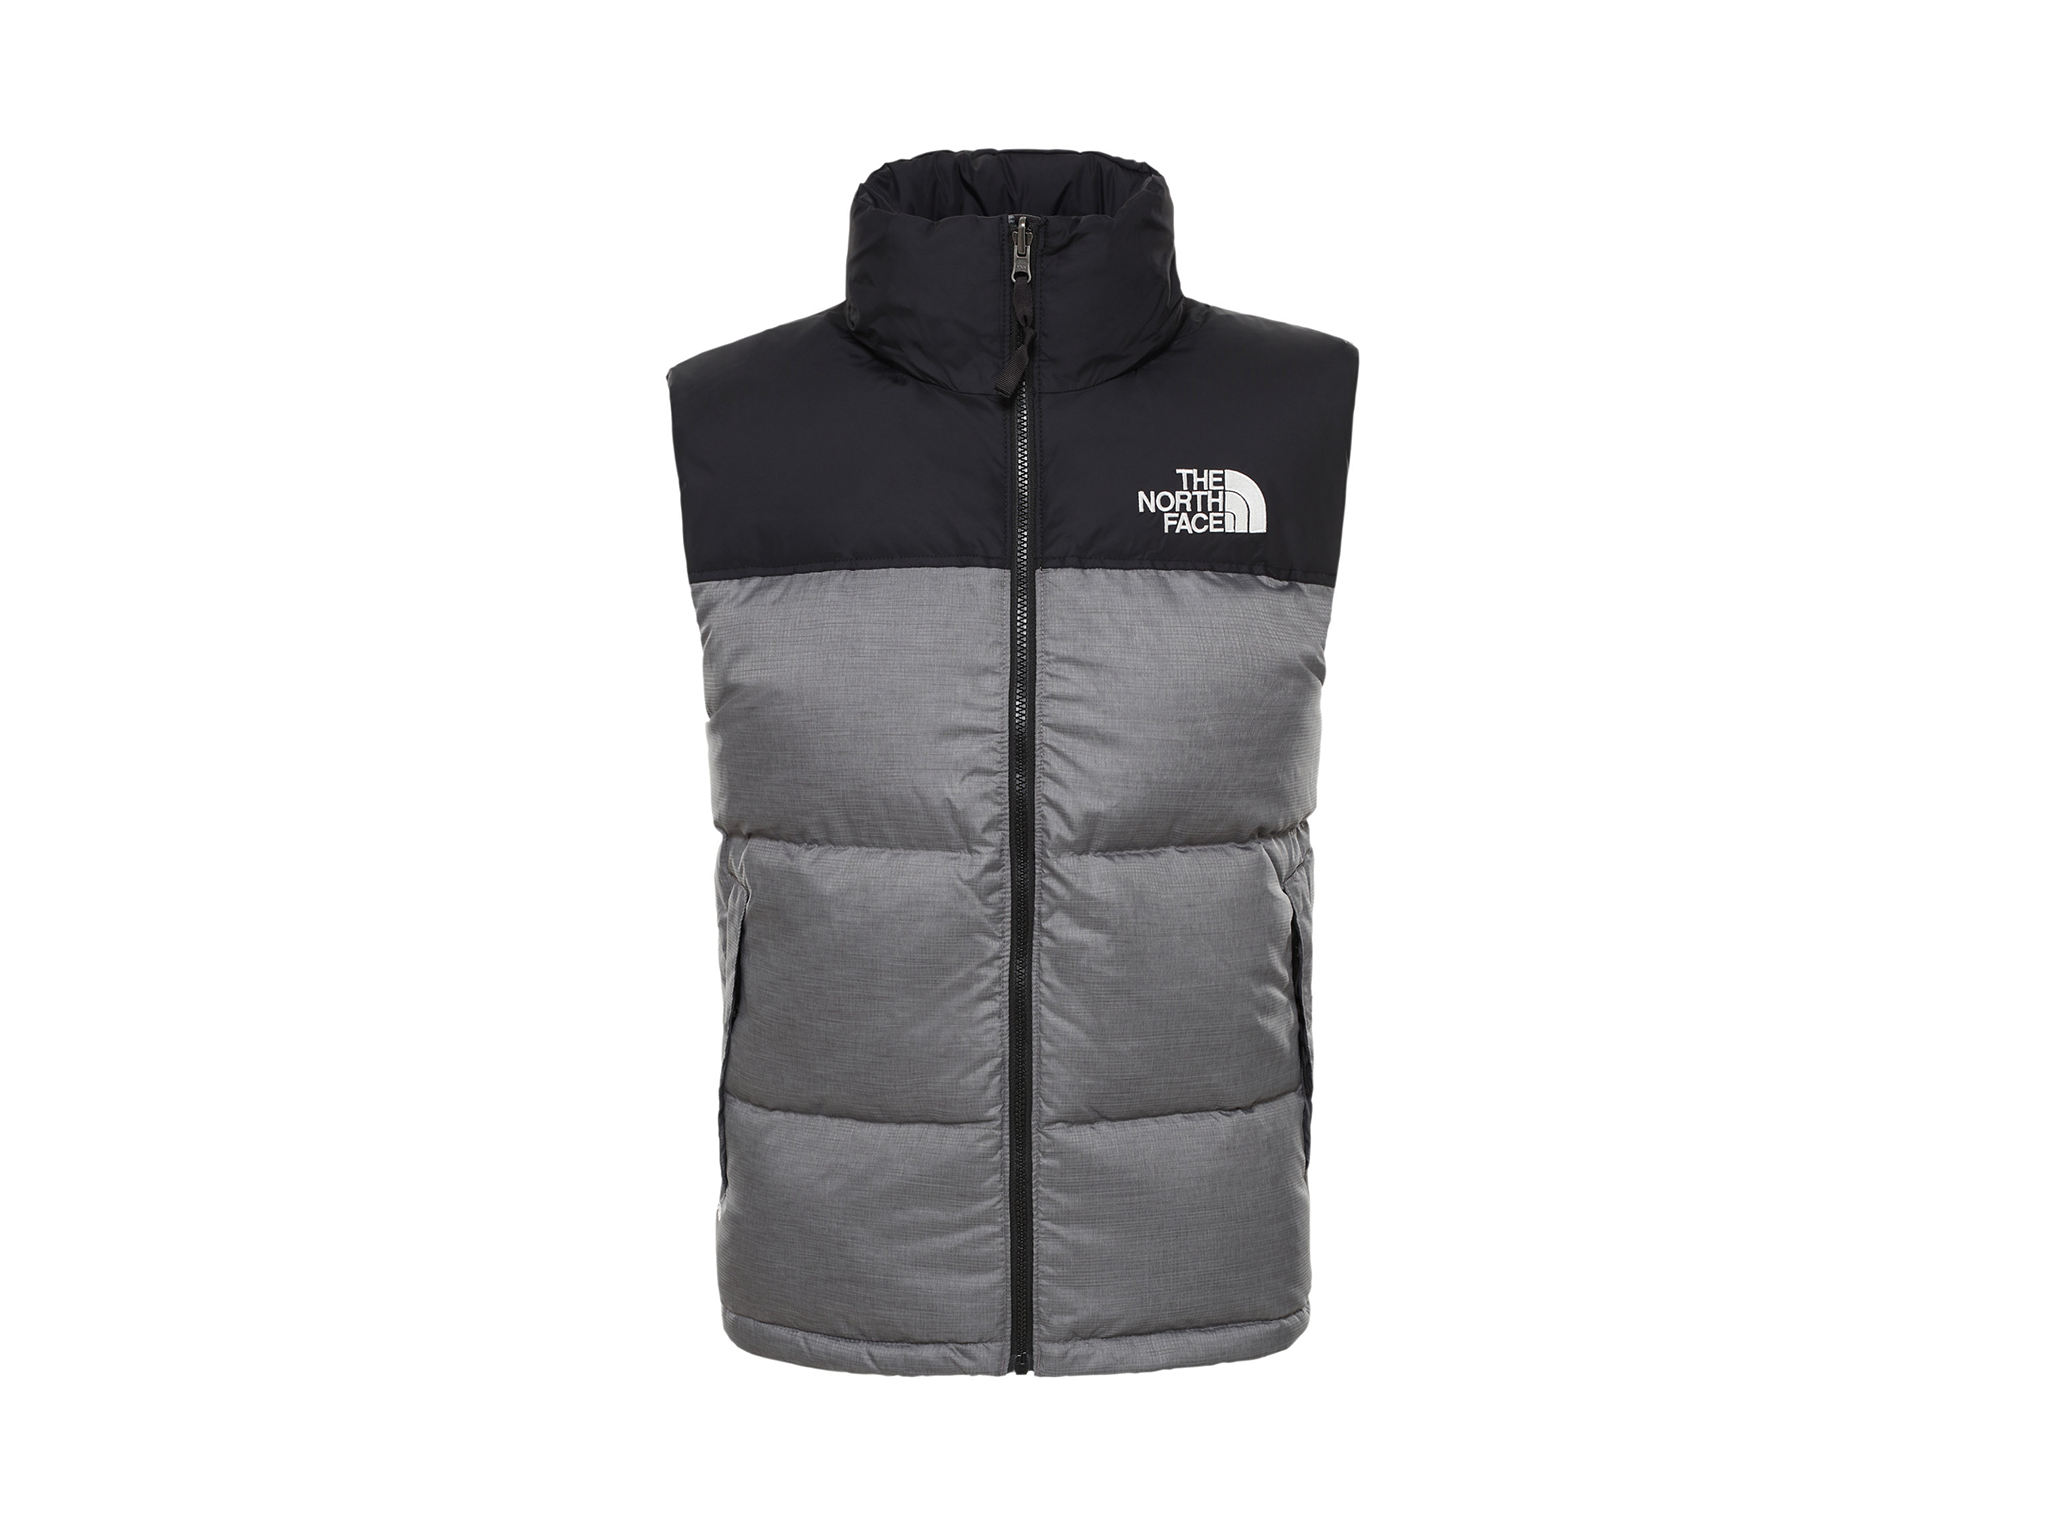 Mens Clothing Jackets Waistcoats and gilets The North Face Recycled Materials Meet Lightweight Breathable Insulation For Cold Days in Black for Men 